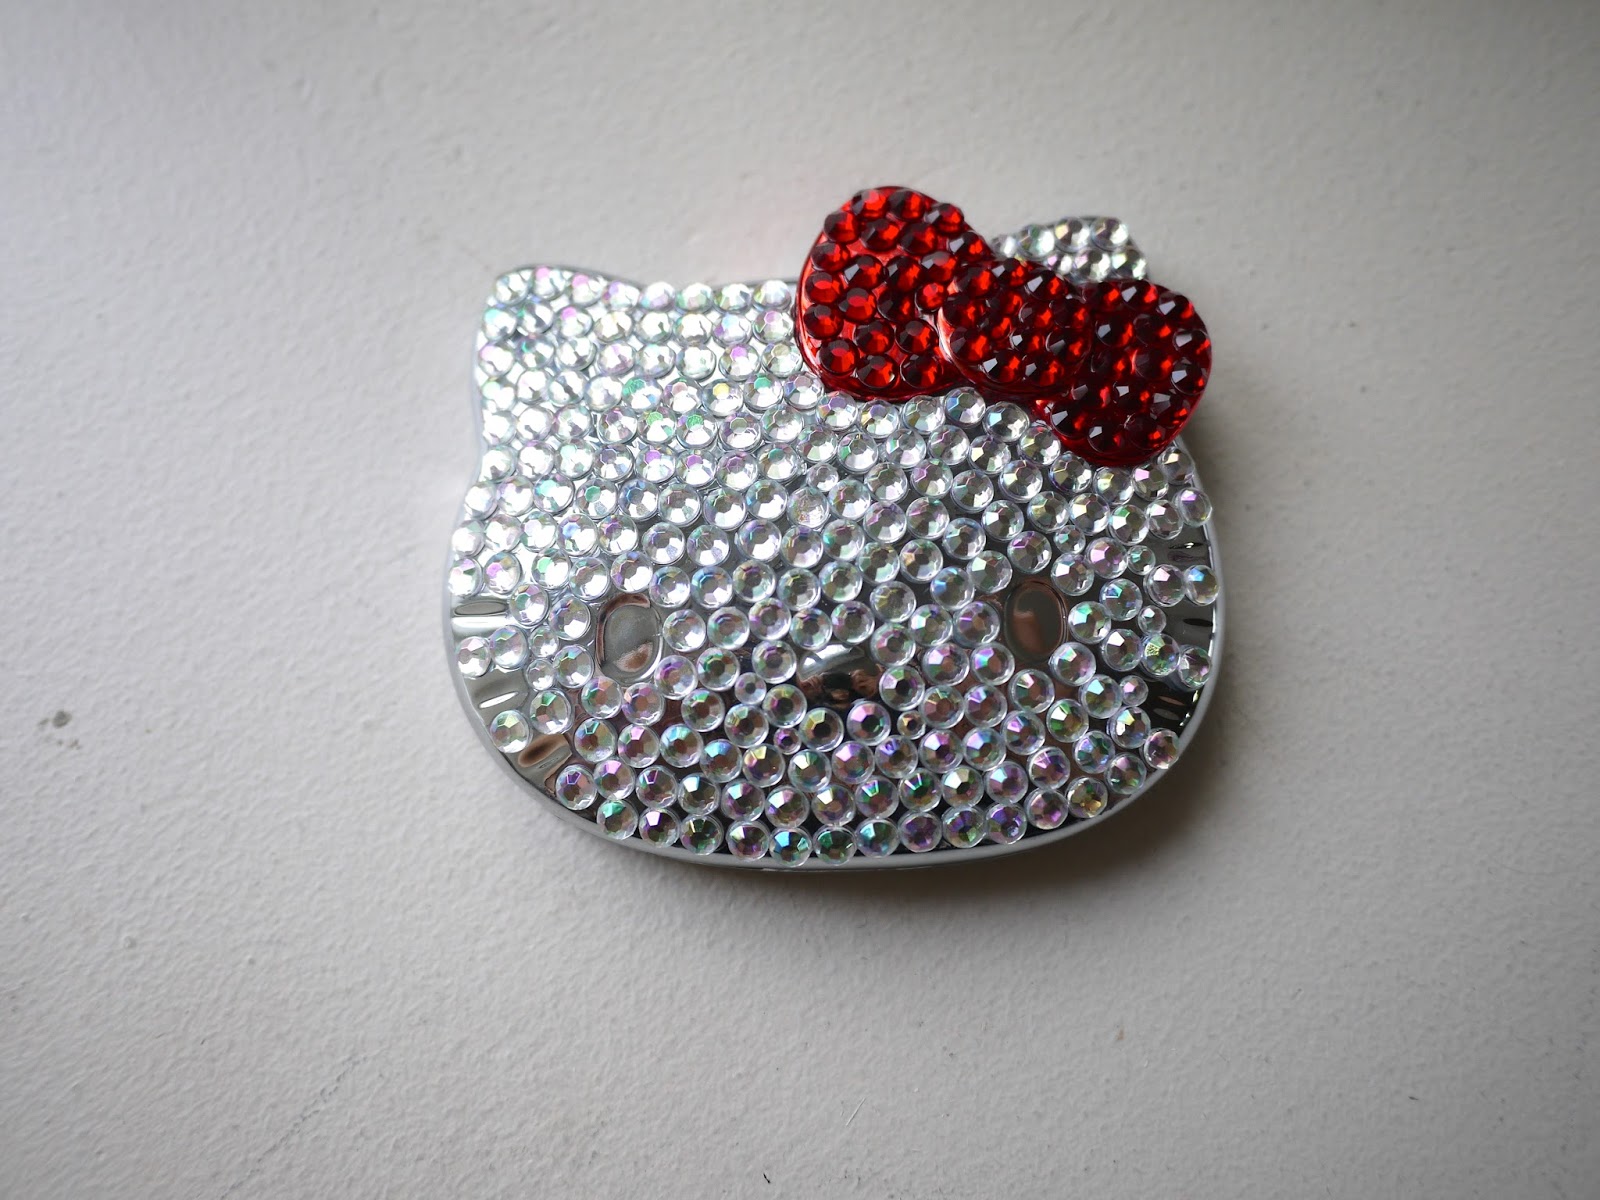 Sephora Hello Kitty Milk Money Makeup Bag and Ruby Compact MIrror review